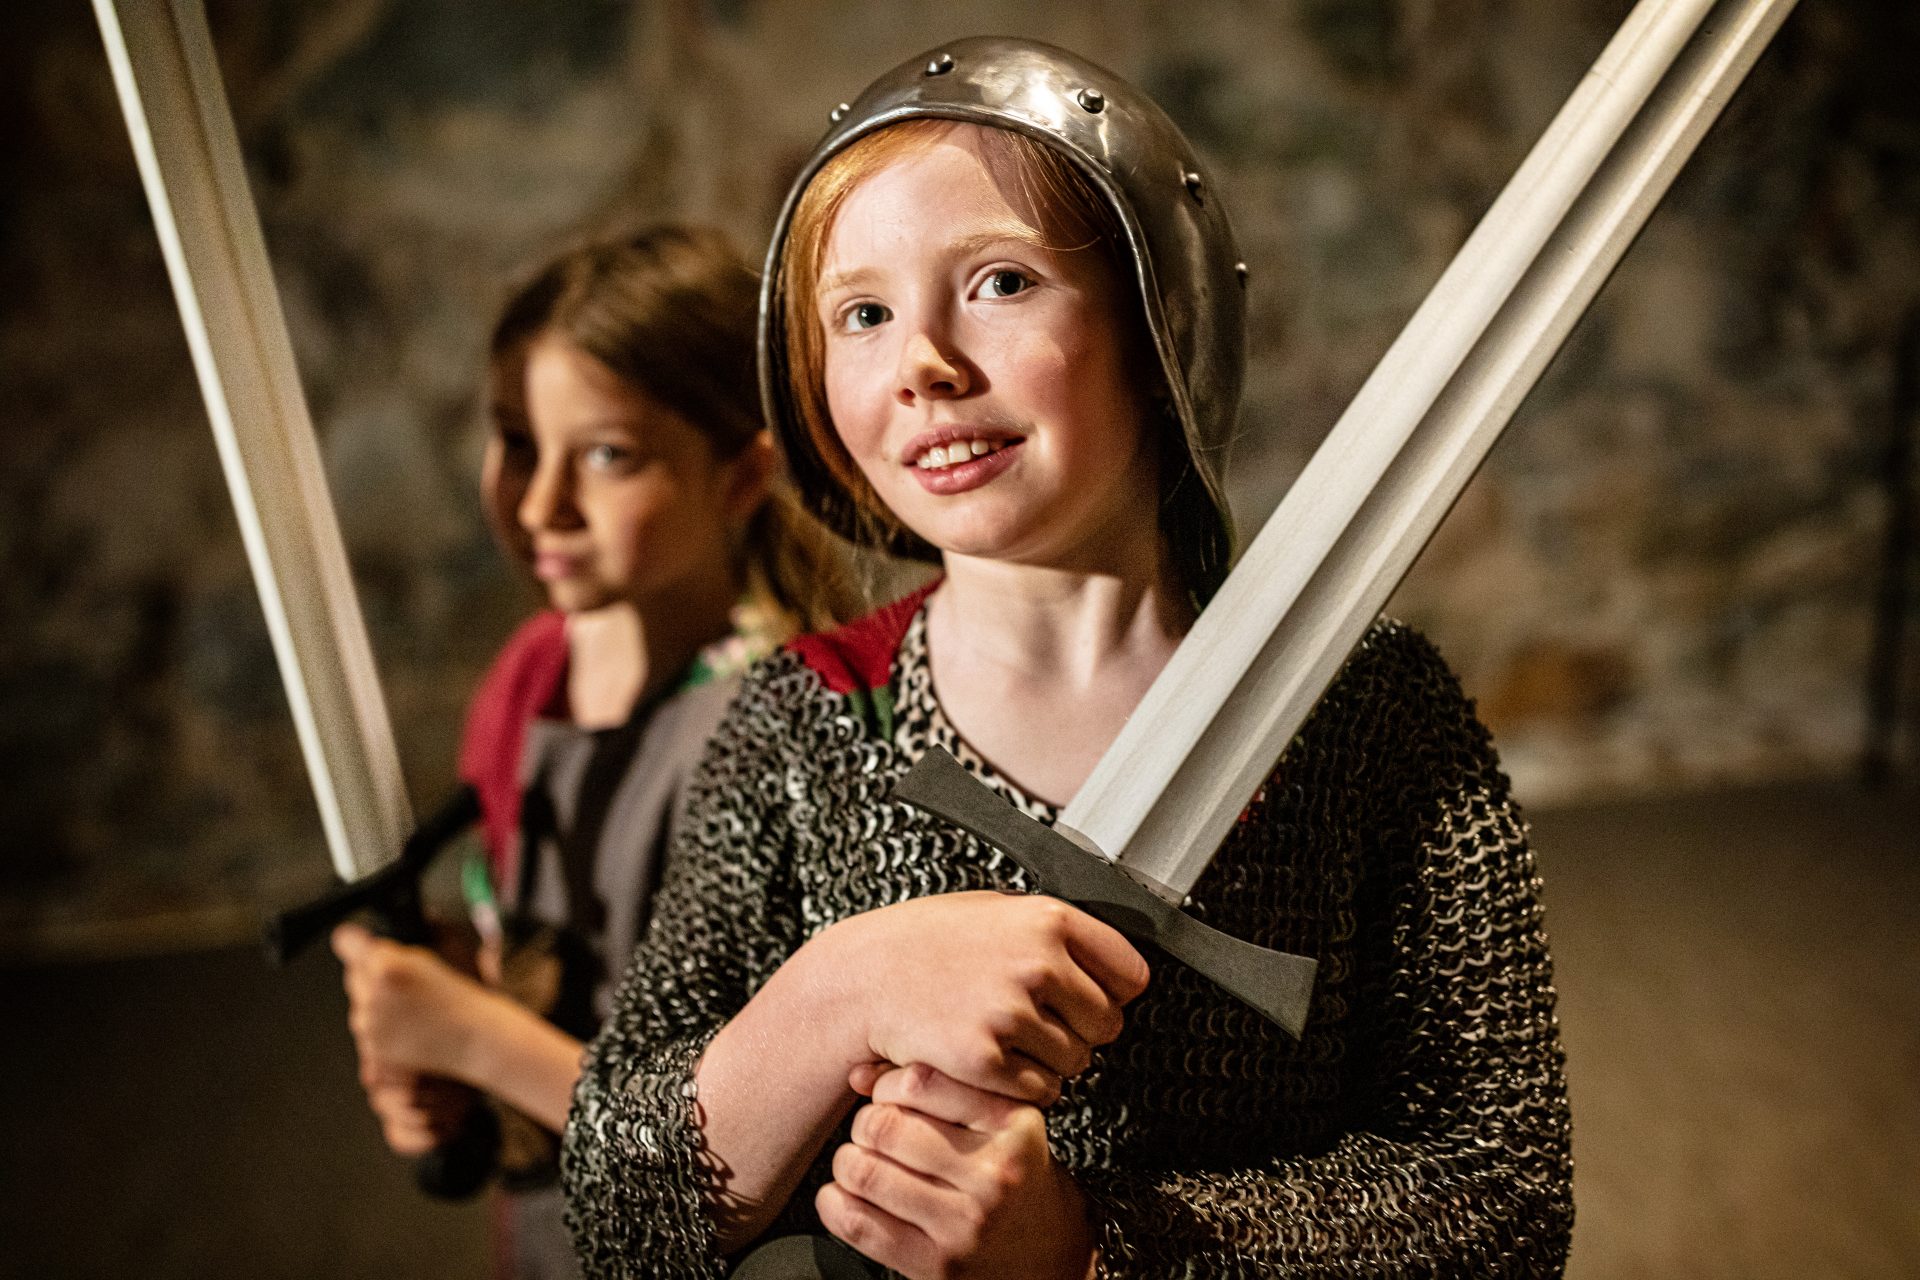 Two children dressed in separate suits of armor, each holding a toy sword.